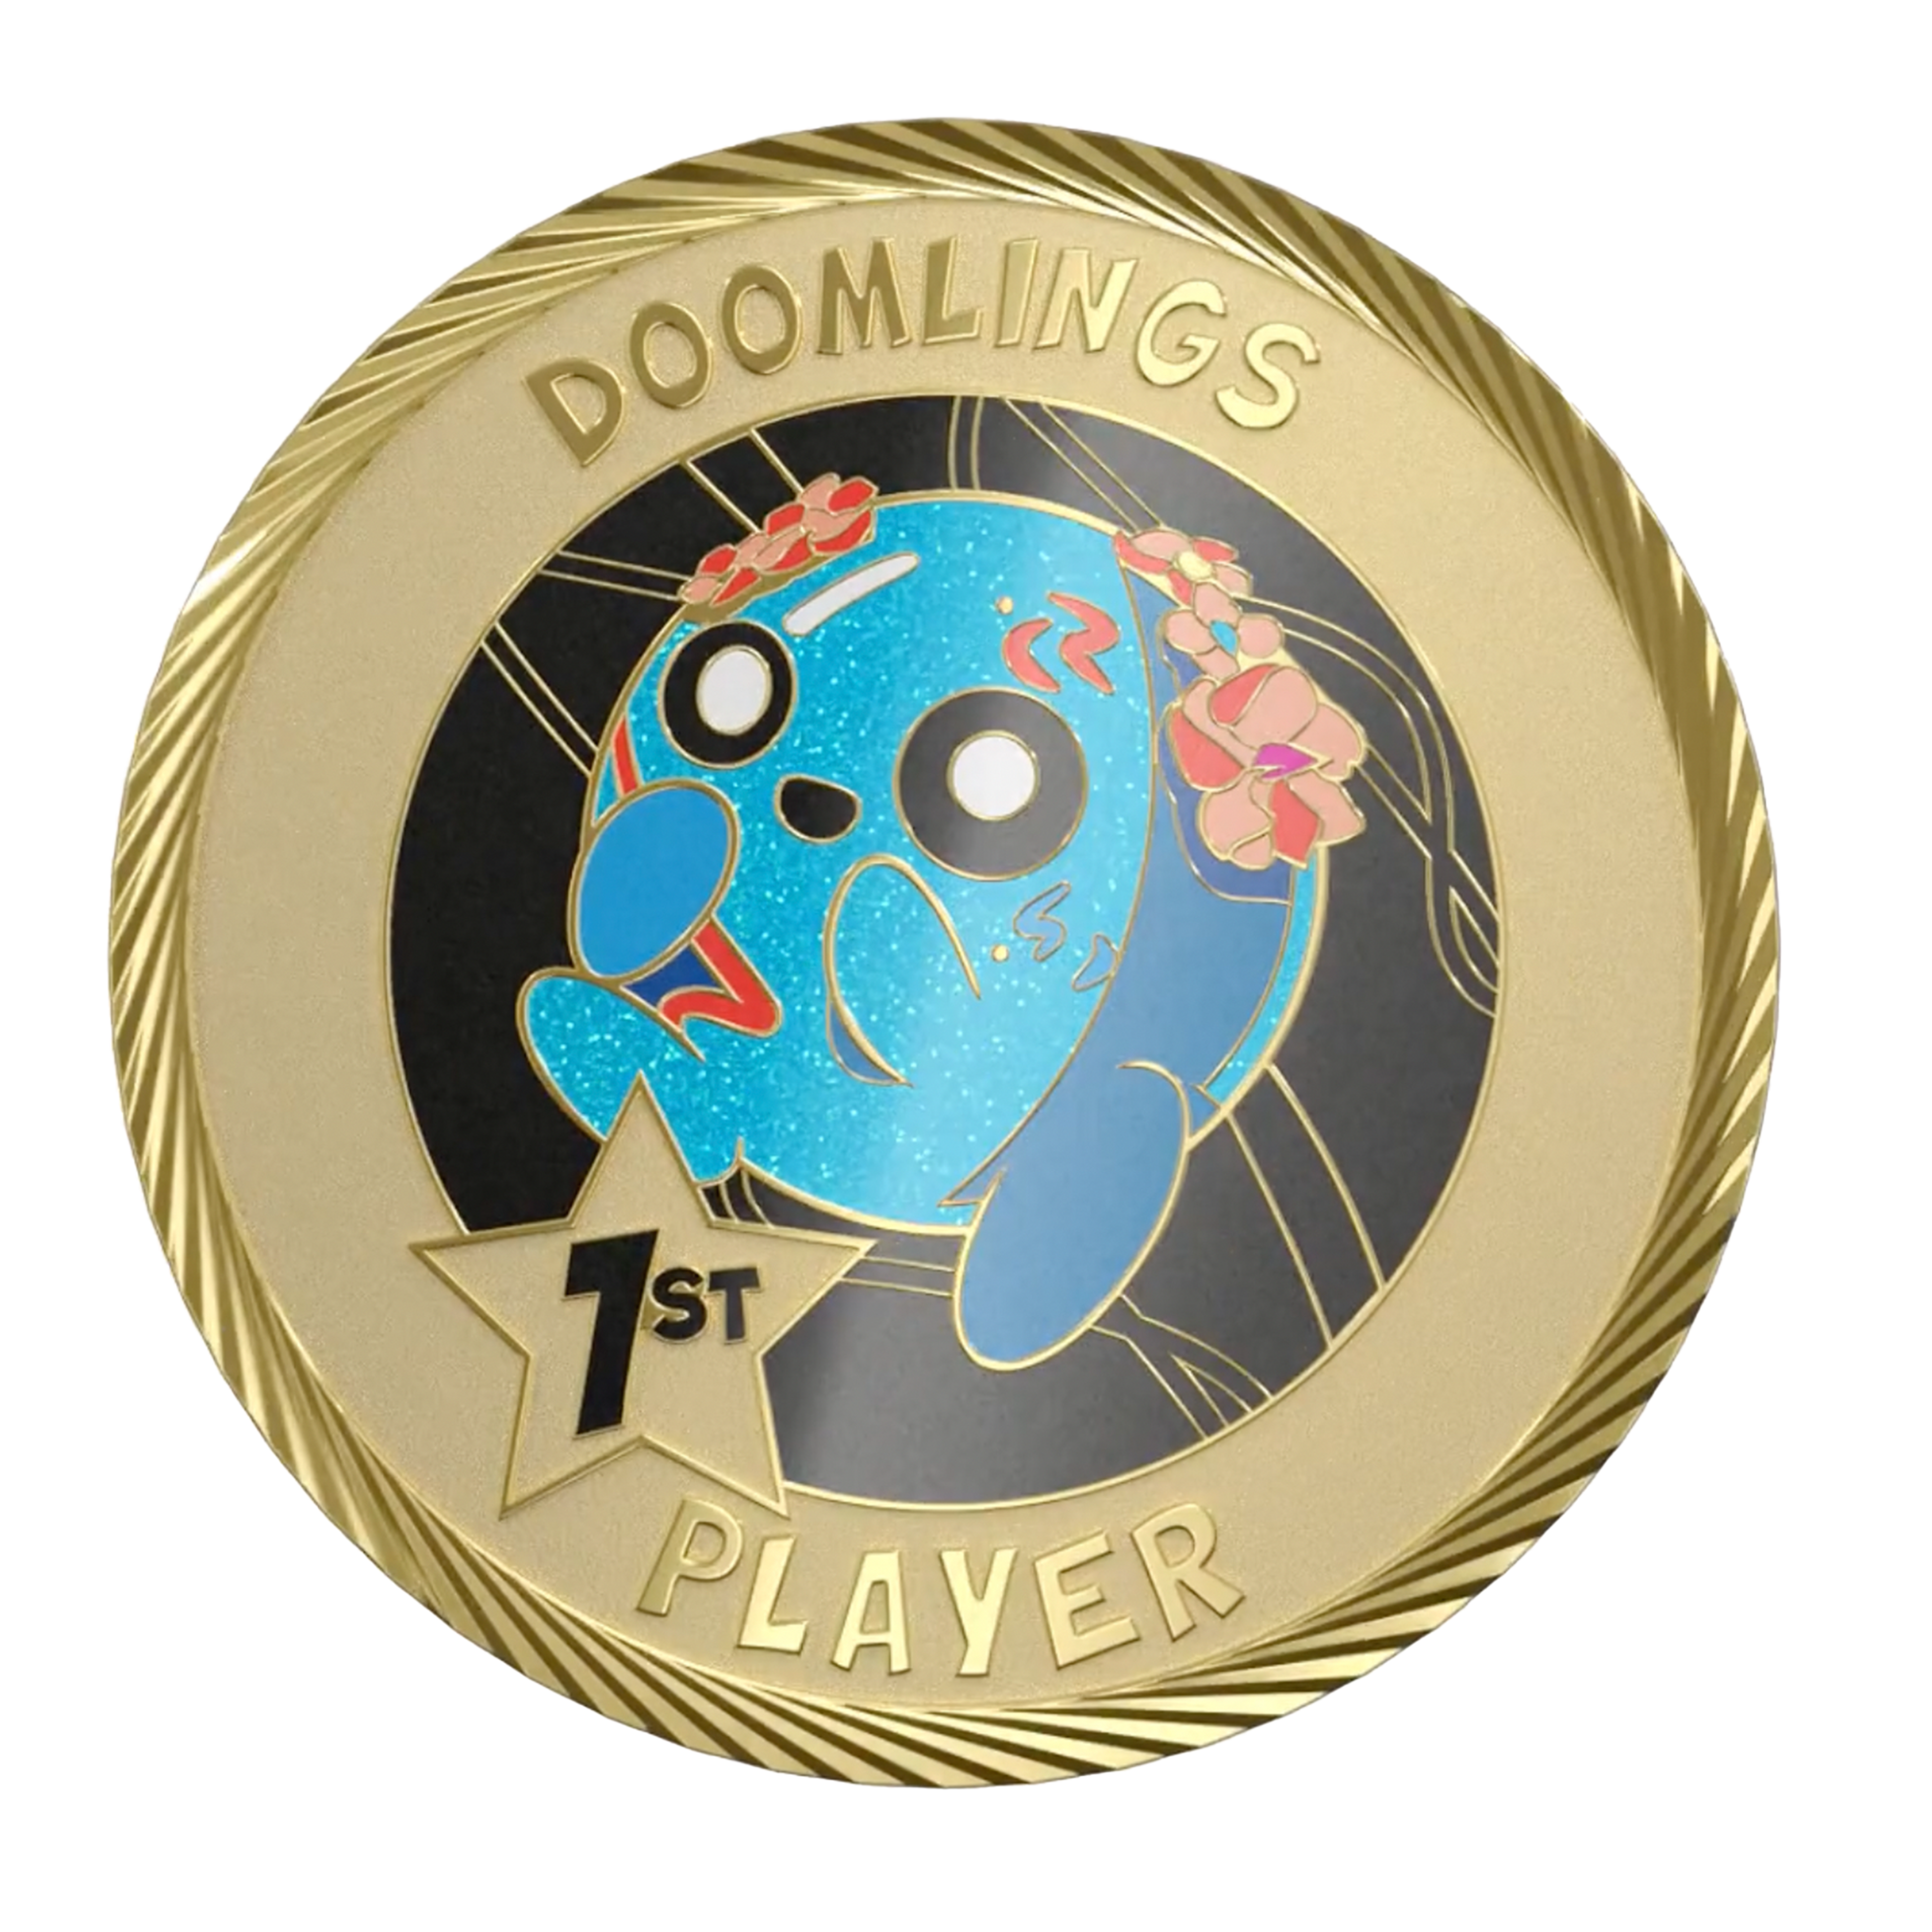 Contagious 1st Player Medallion